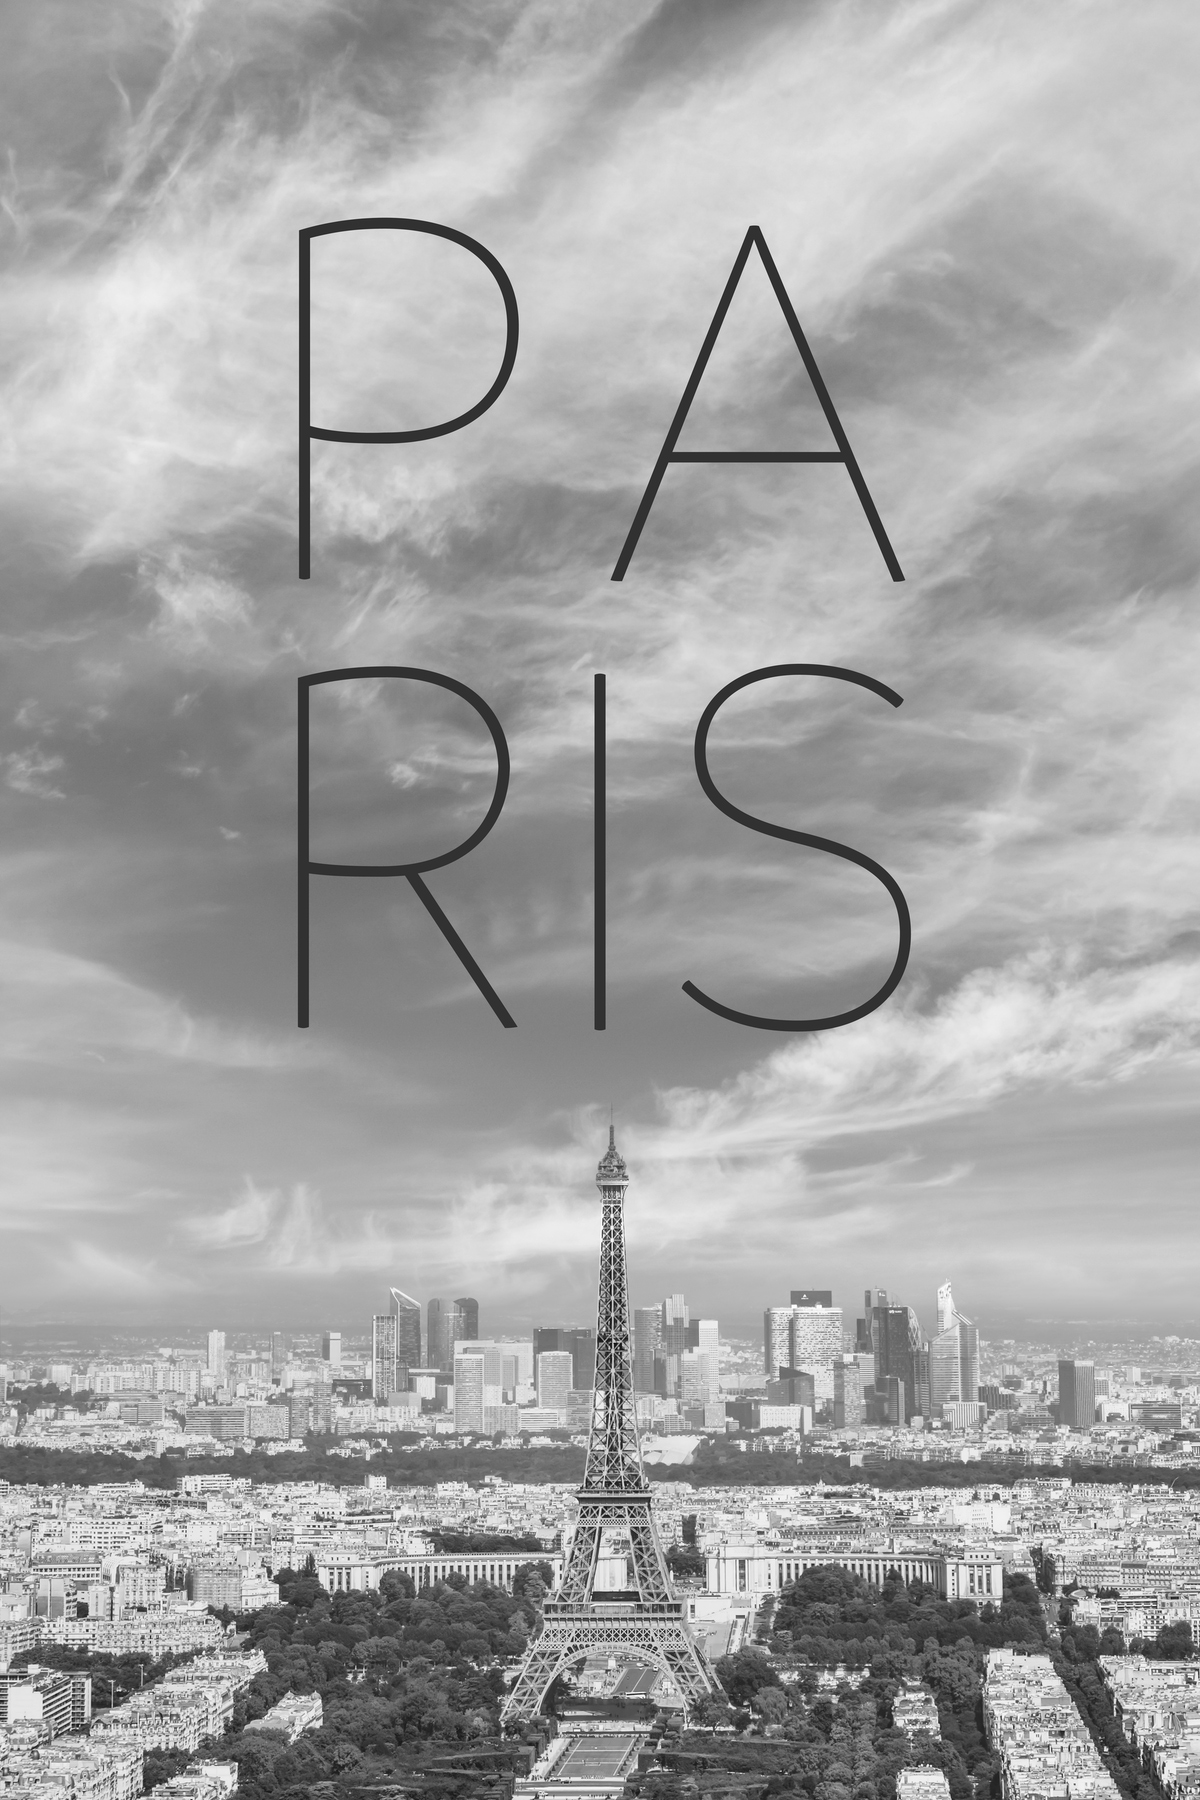 Buy Paris Skyline with text wallpaper Free shipping